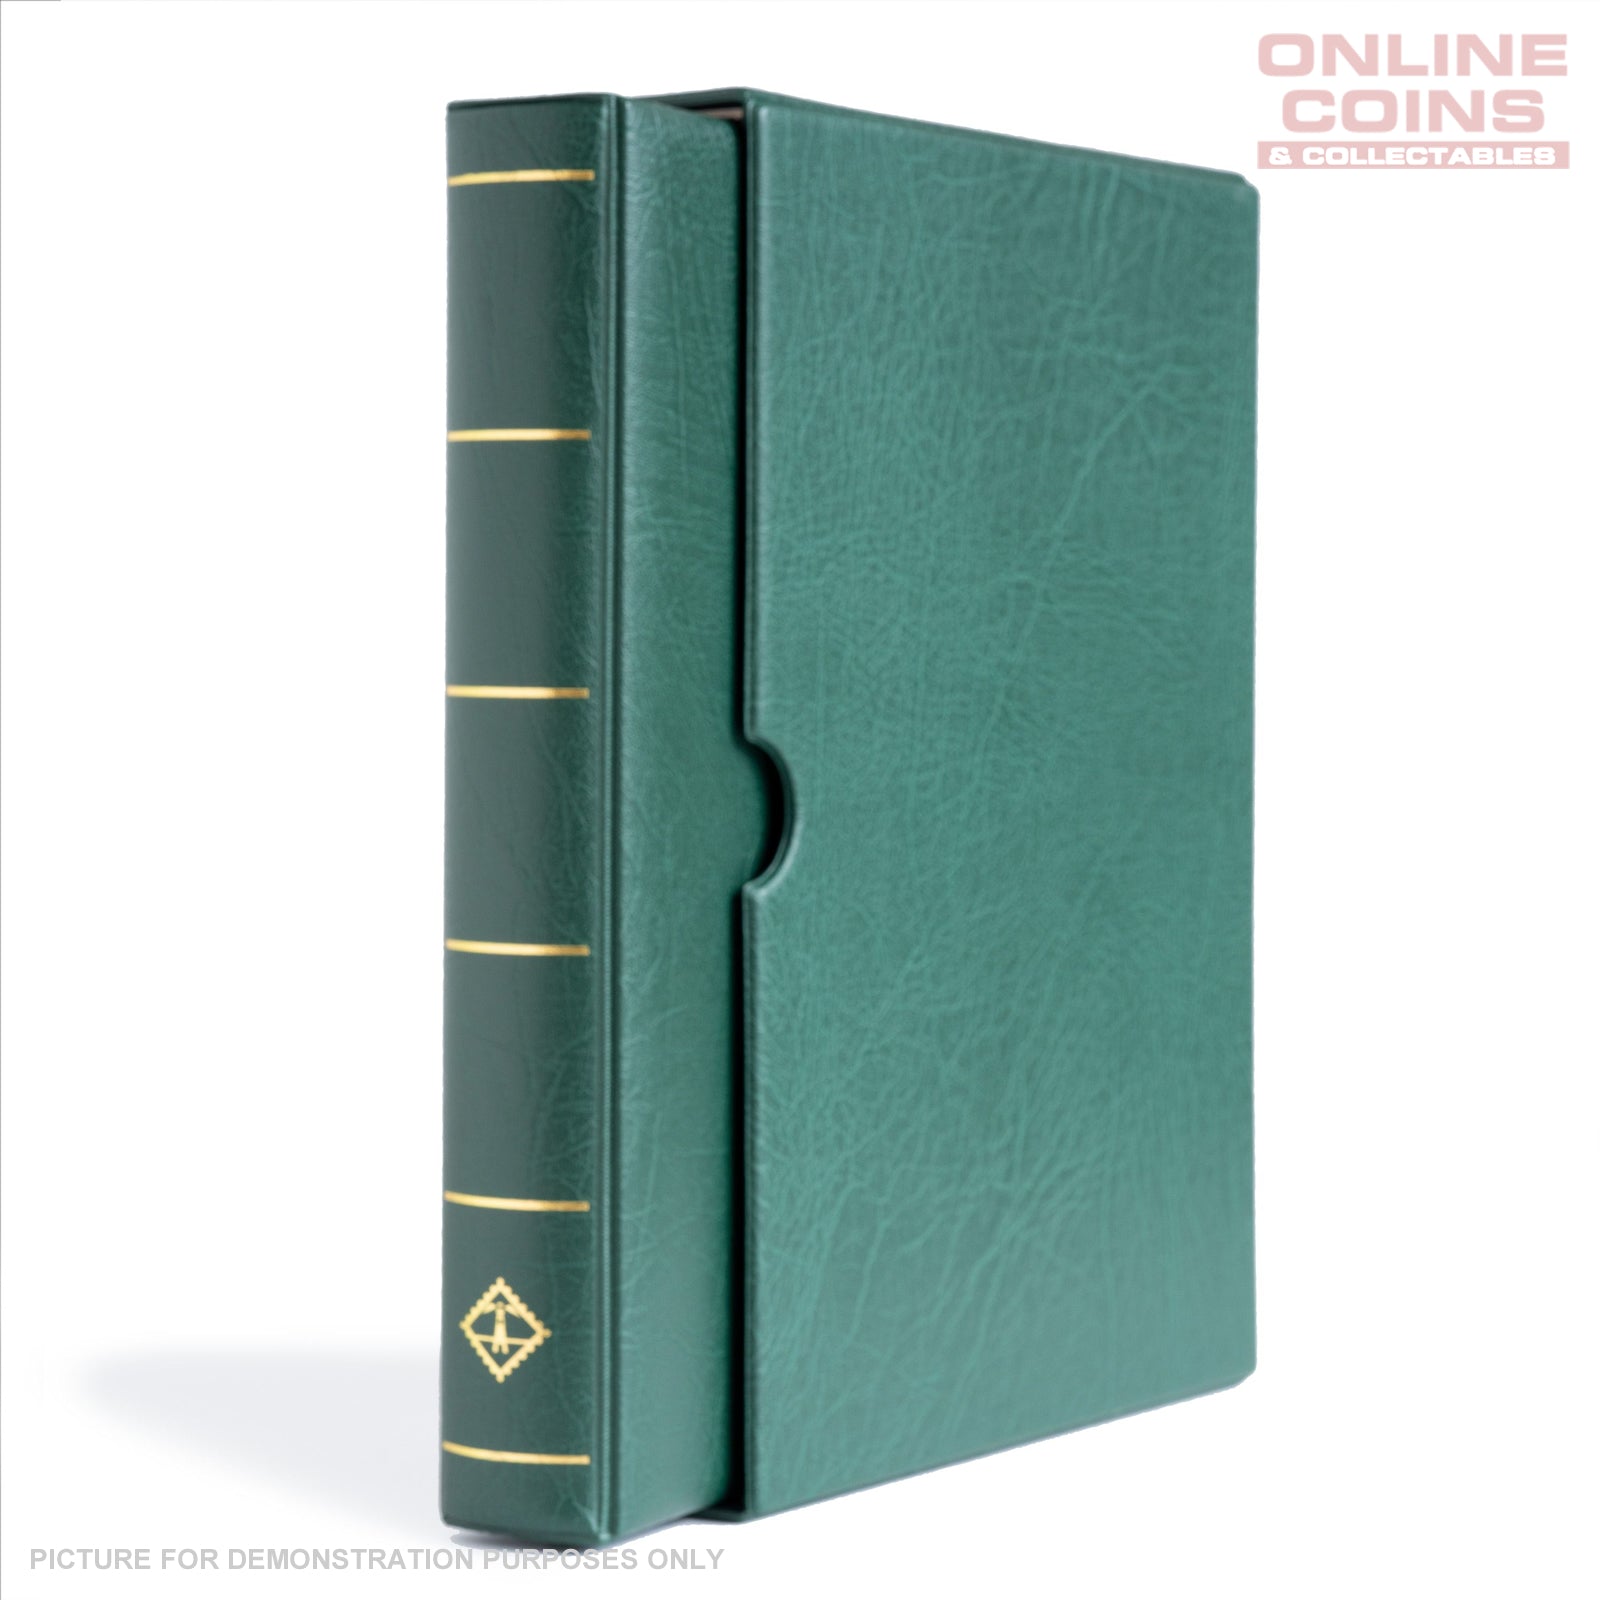 Lighthouse - Vario F Banknotes and Stamps Album With Slipcase - Green